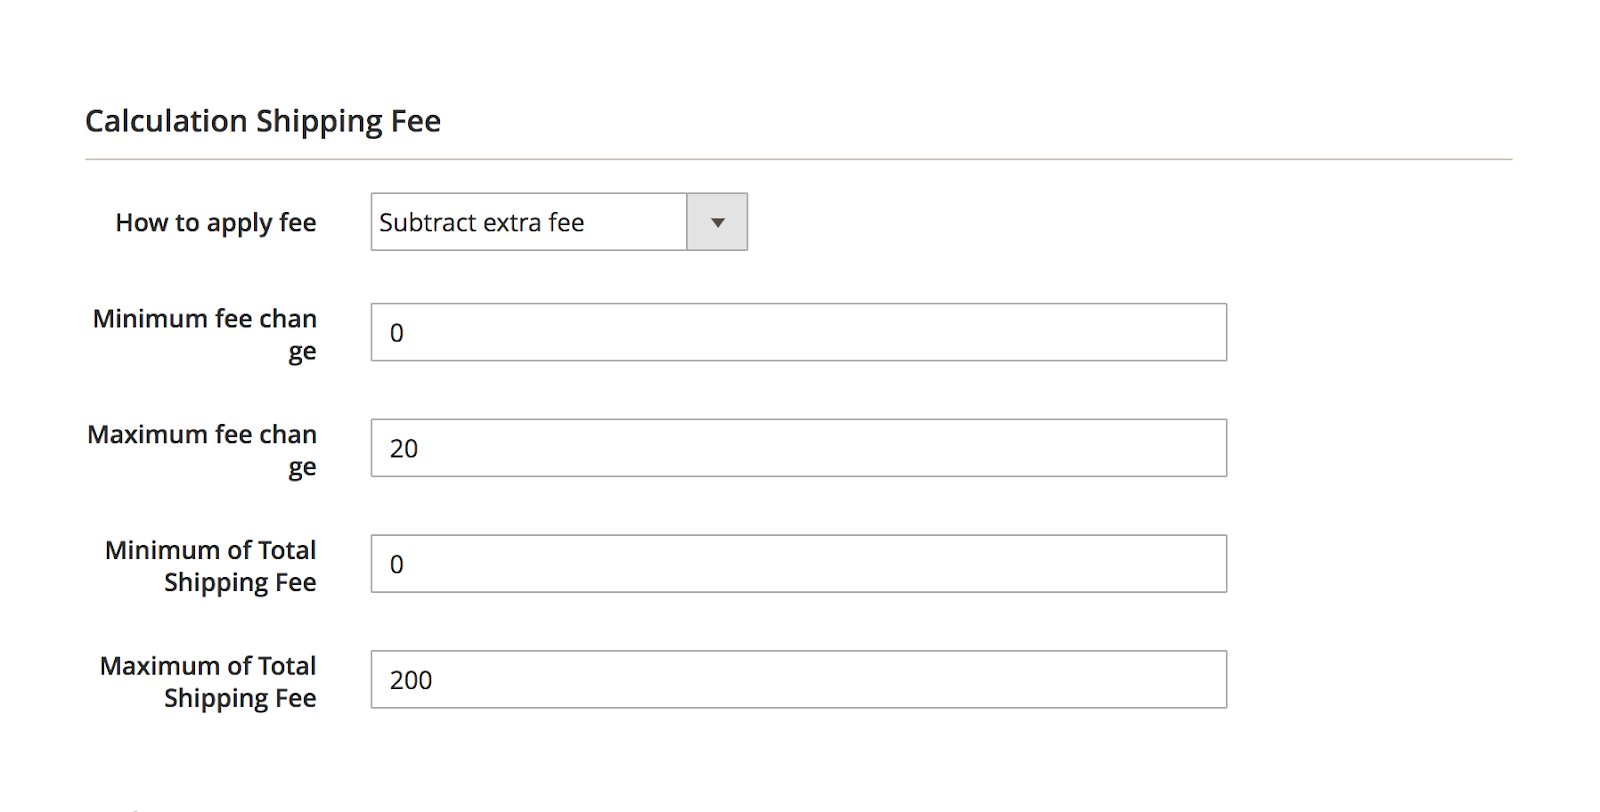 Set the option Subtract extra fee for How to apply fee field